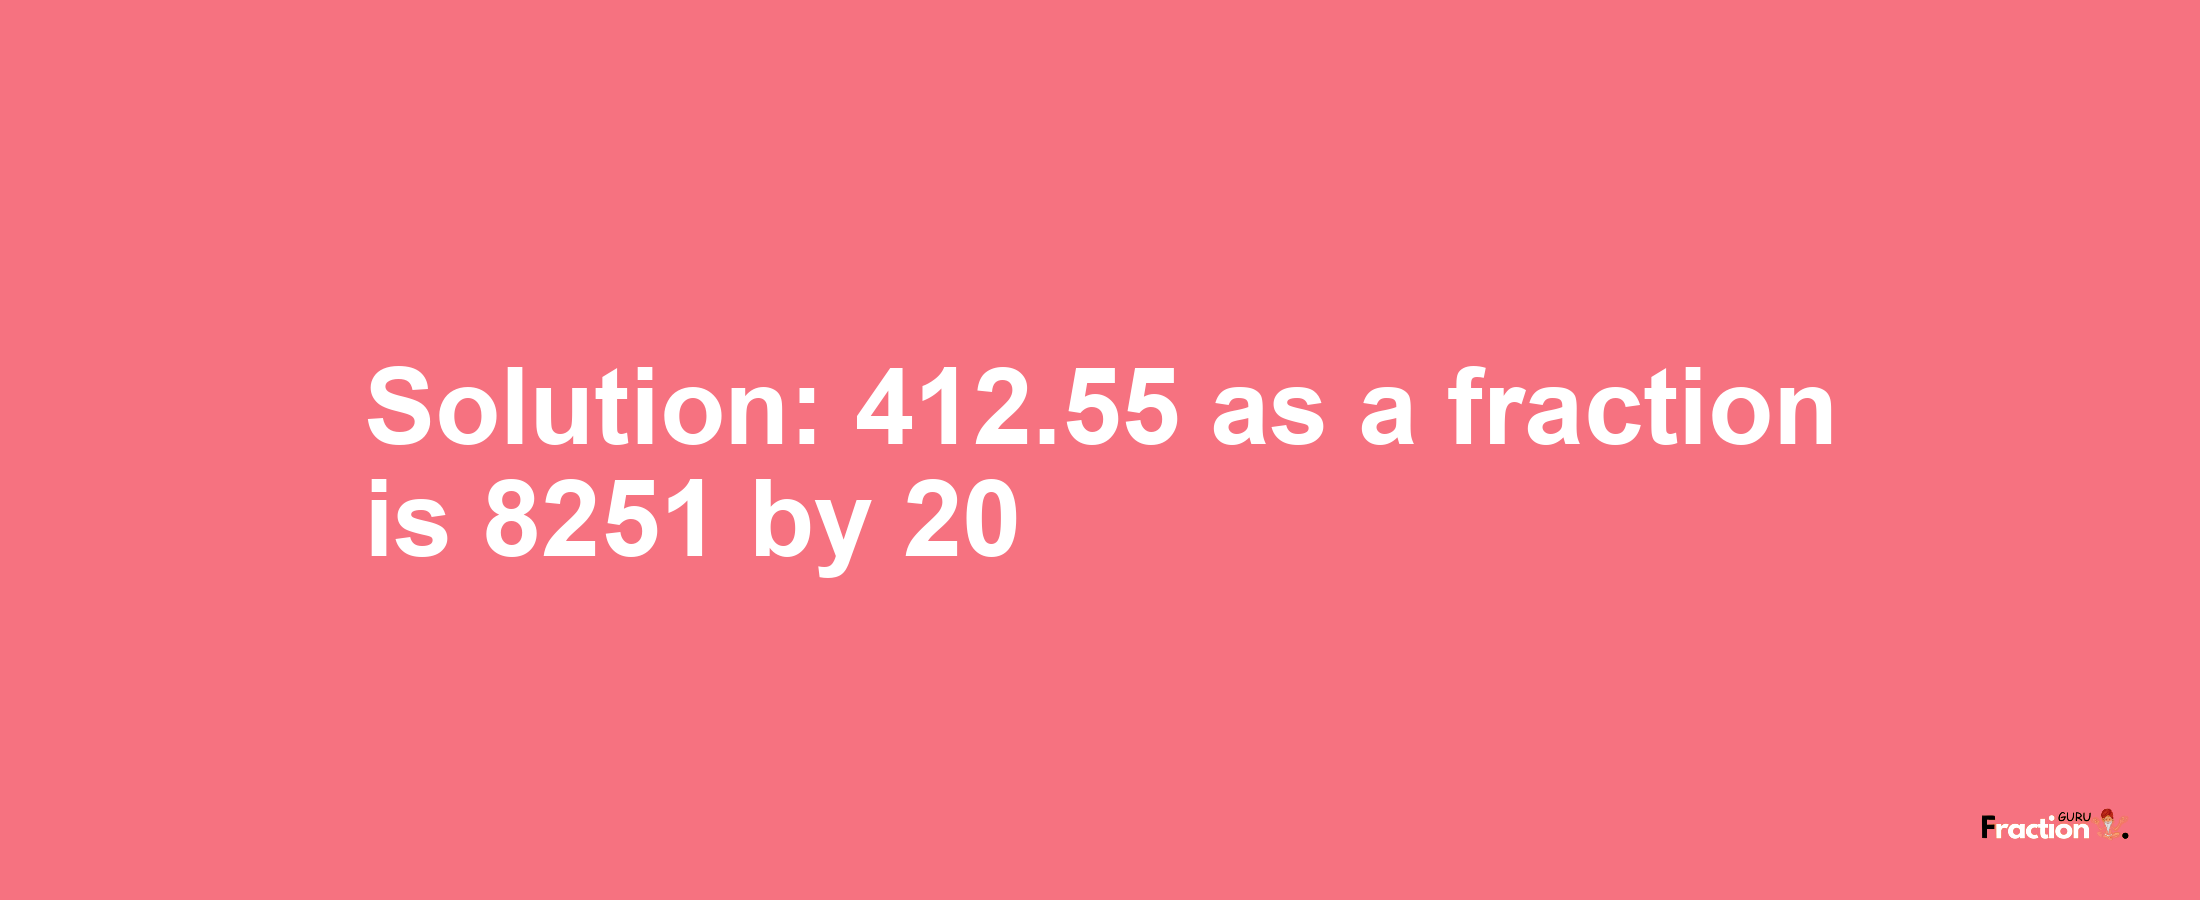 Solution:412.55 as a fraction is 8251/20